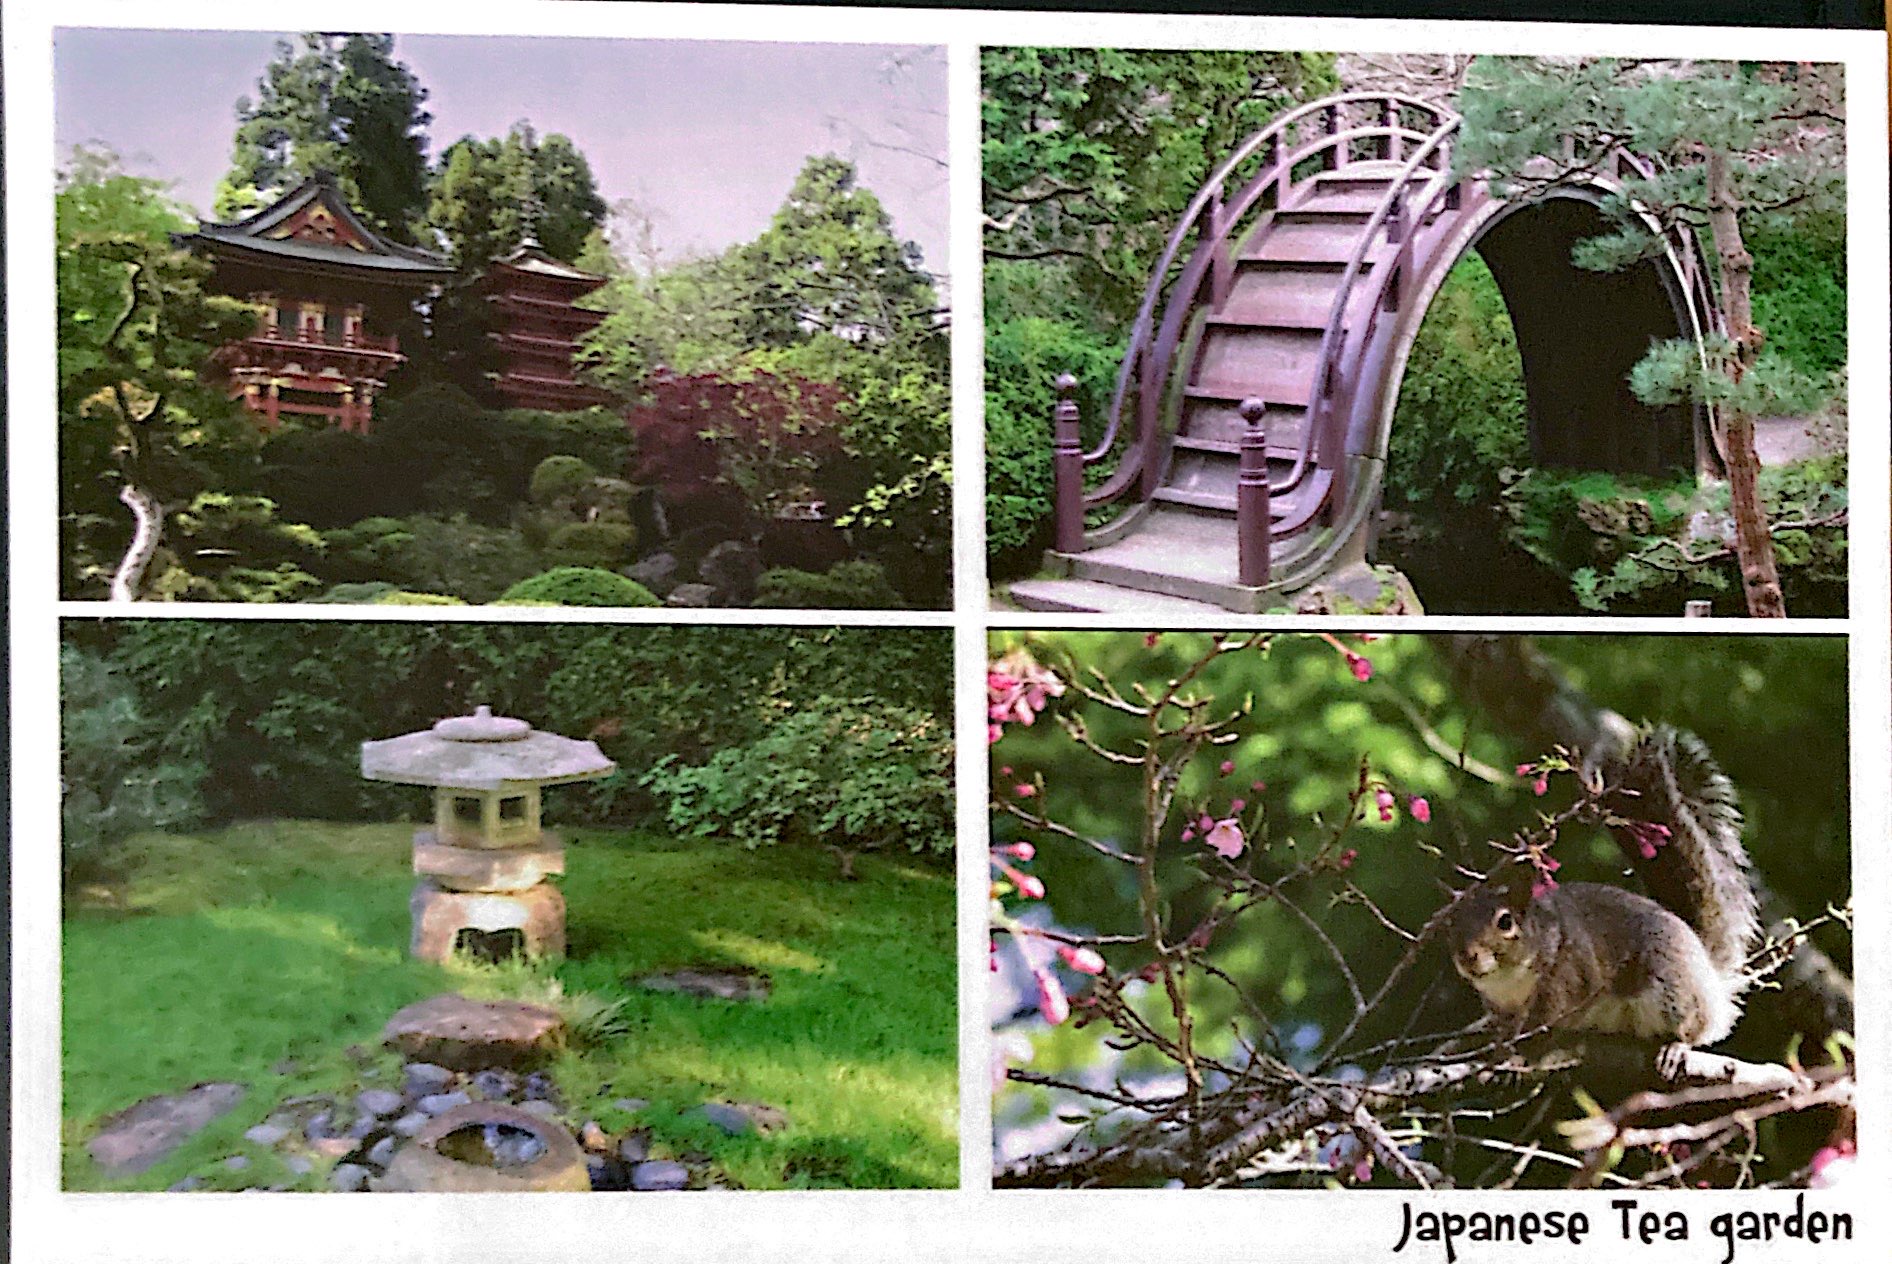 4 photos of the San Francsico tea garden, 1. The Pagoda 2. The Curly uncrossable bridge 3. A stone structure 4. A squirrel on a cherry blossom branch